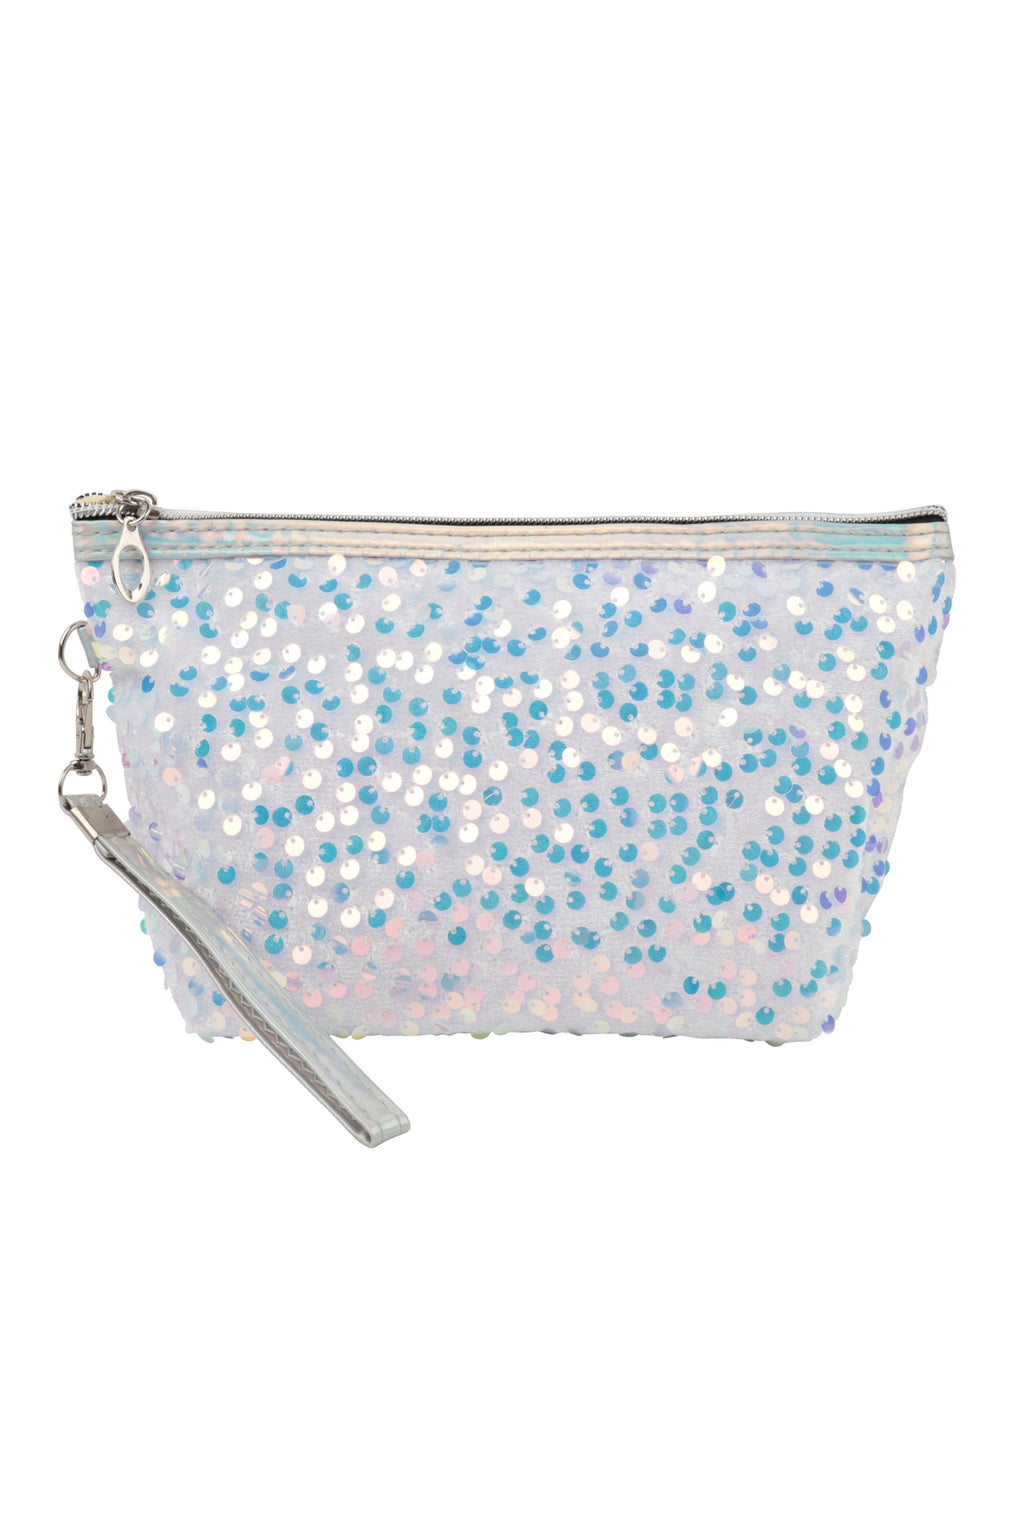 Sequin Glitter Cosmetic Pouch White - Pack of 6